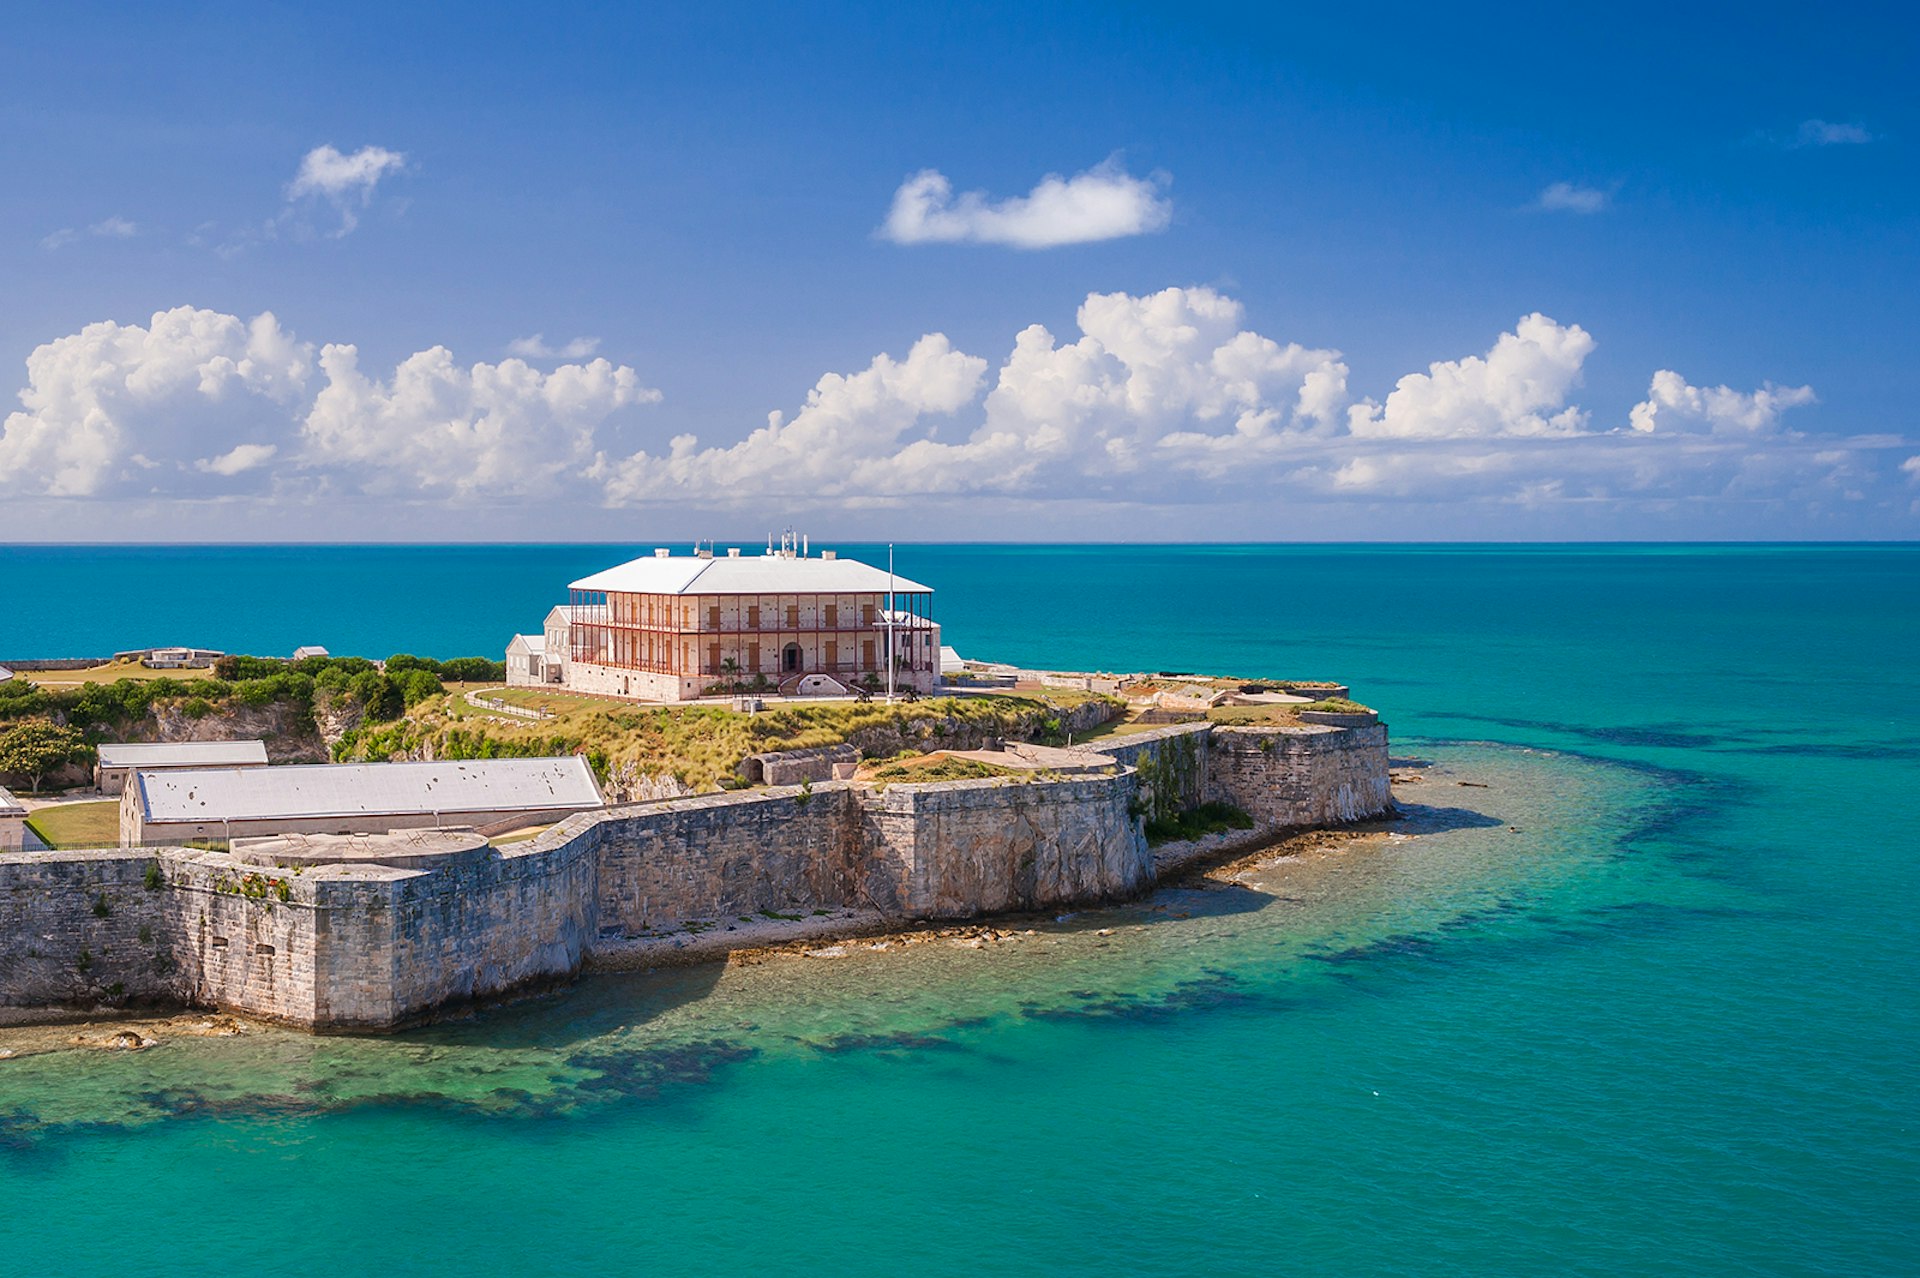 The Commissioner's house in King's Wharf, Bermuda © Pr3t3nd3r / Getty Images